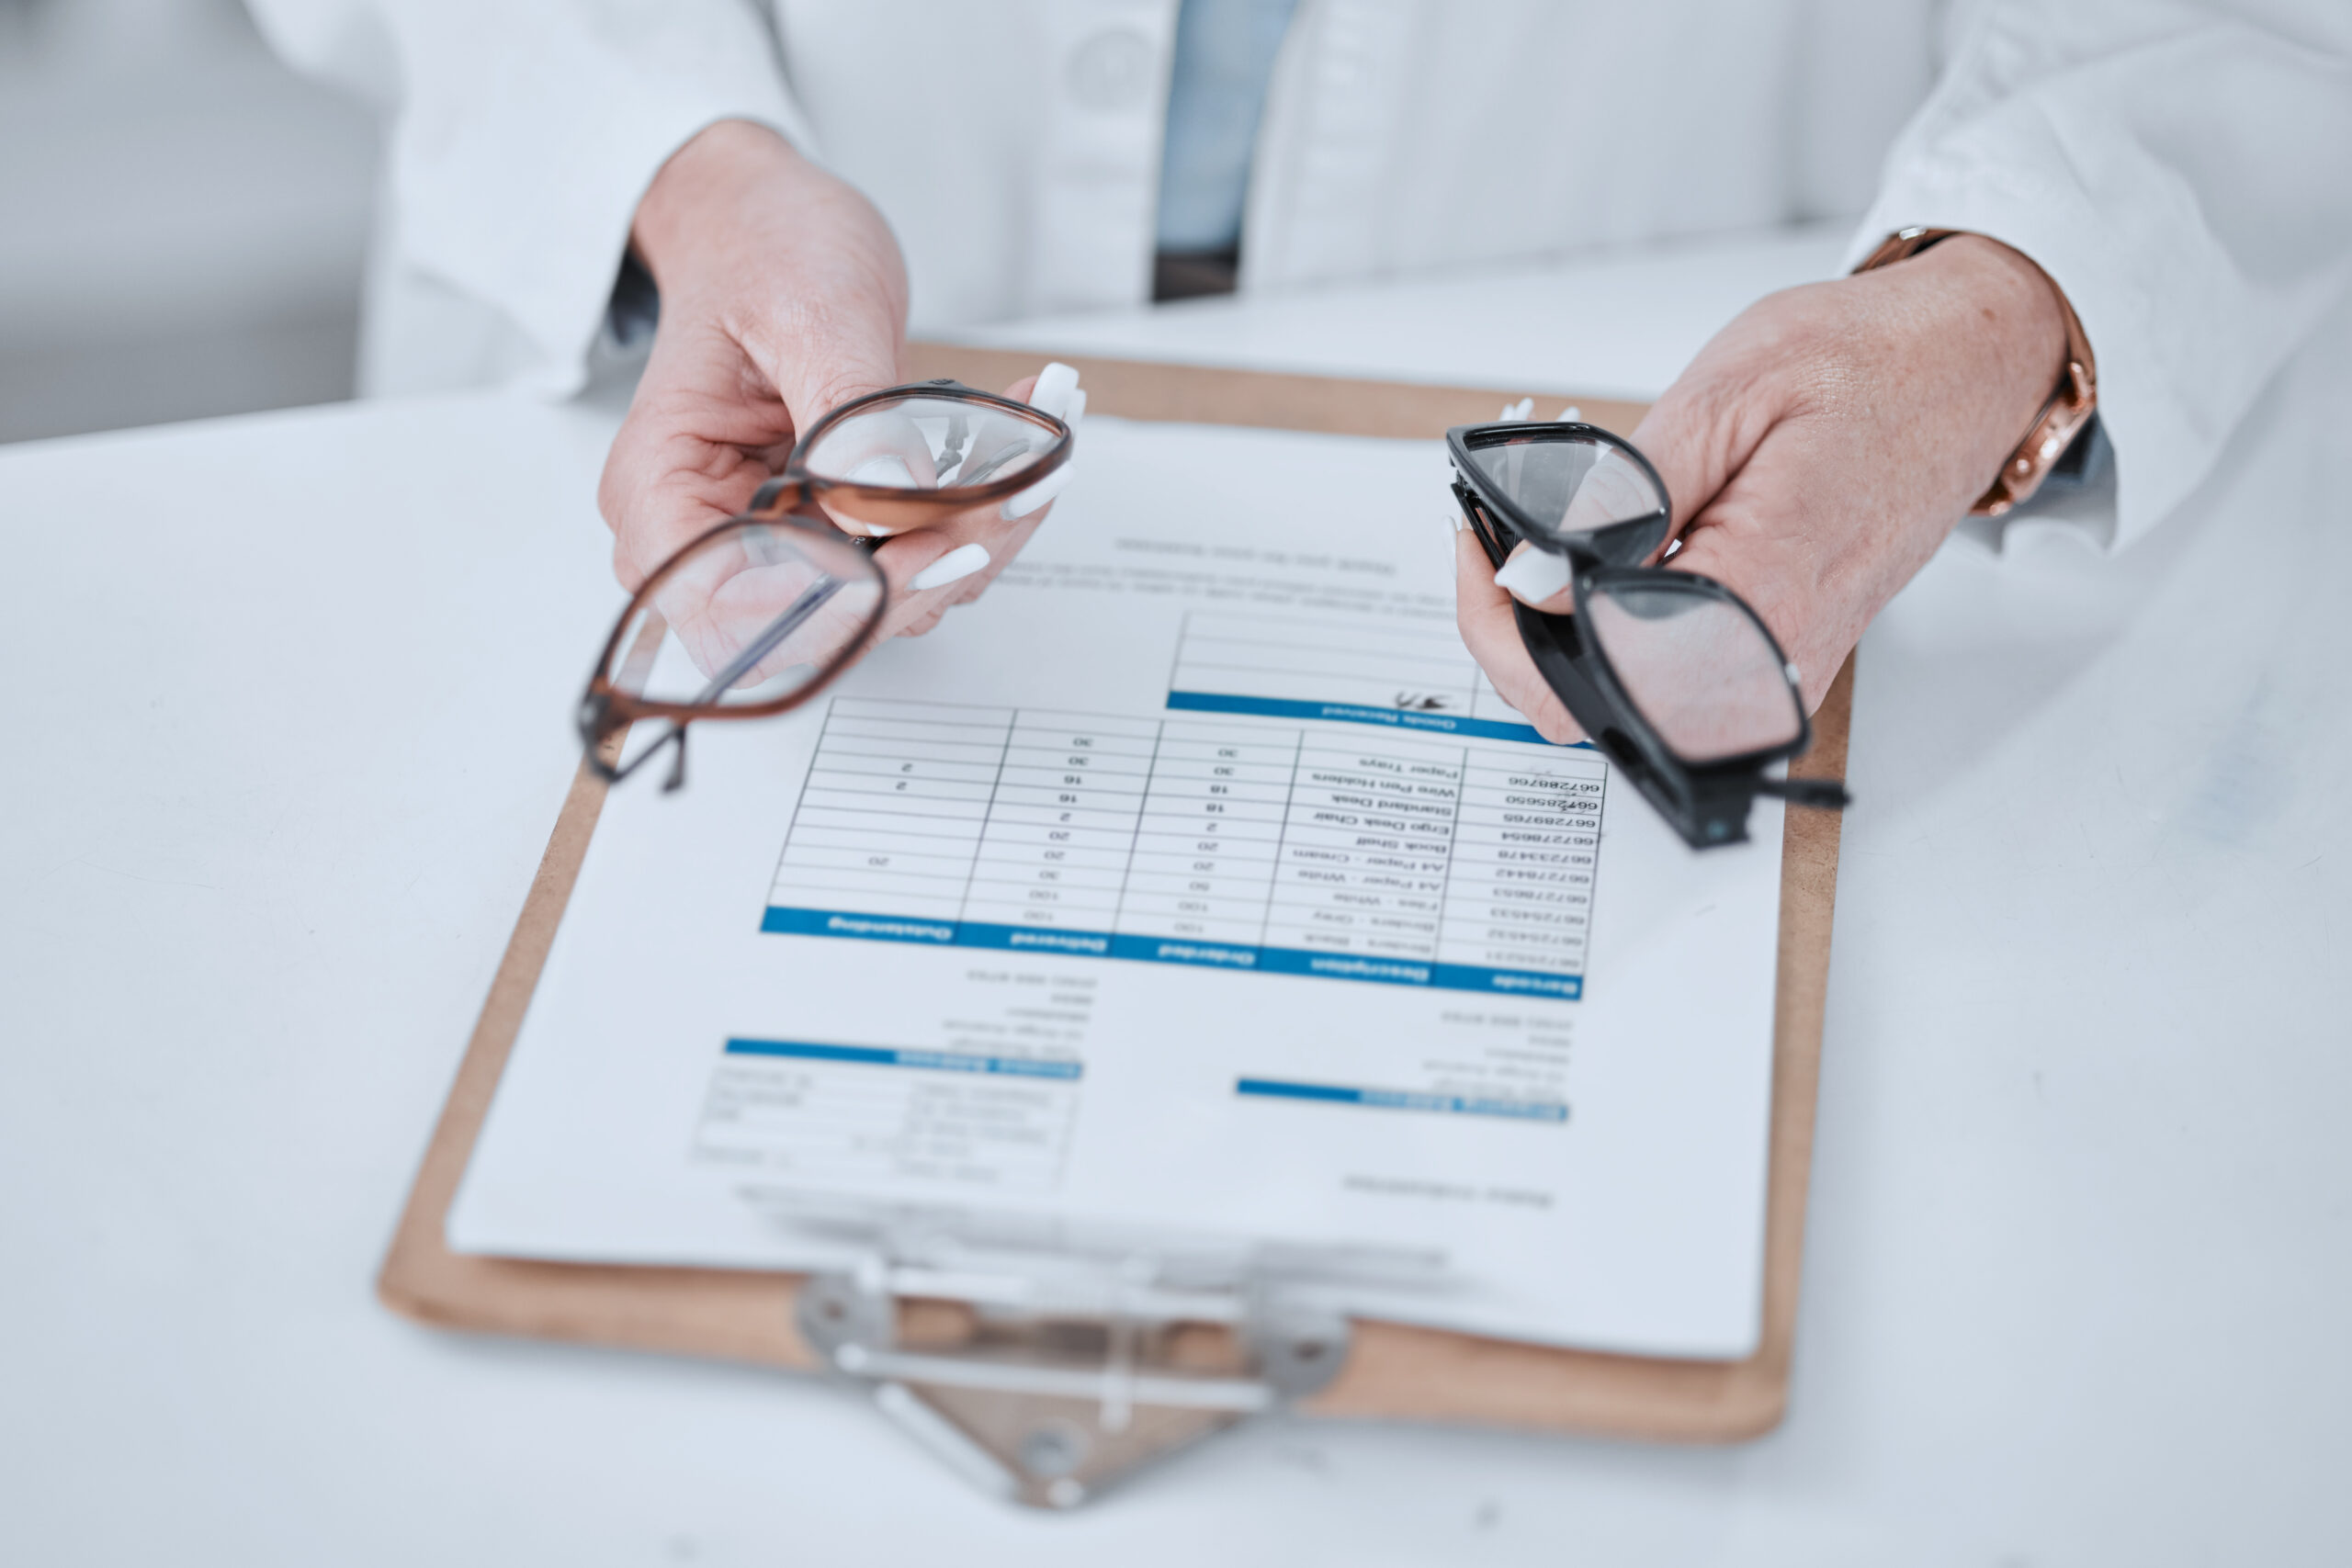 Clipboard, optometry and glasses for vision and eye care or wellness in an optical clinic. Checklist, medical and closeup of prescription spectacles with lens for optometrist or oculist treatment.